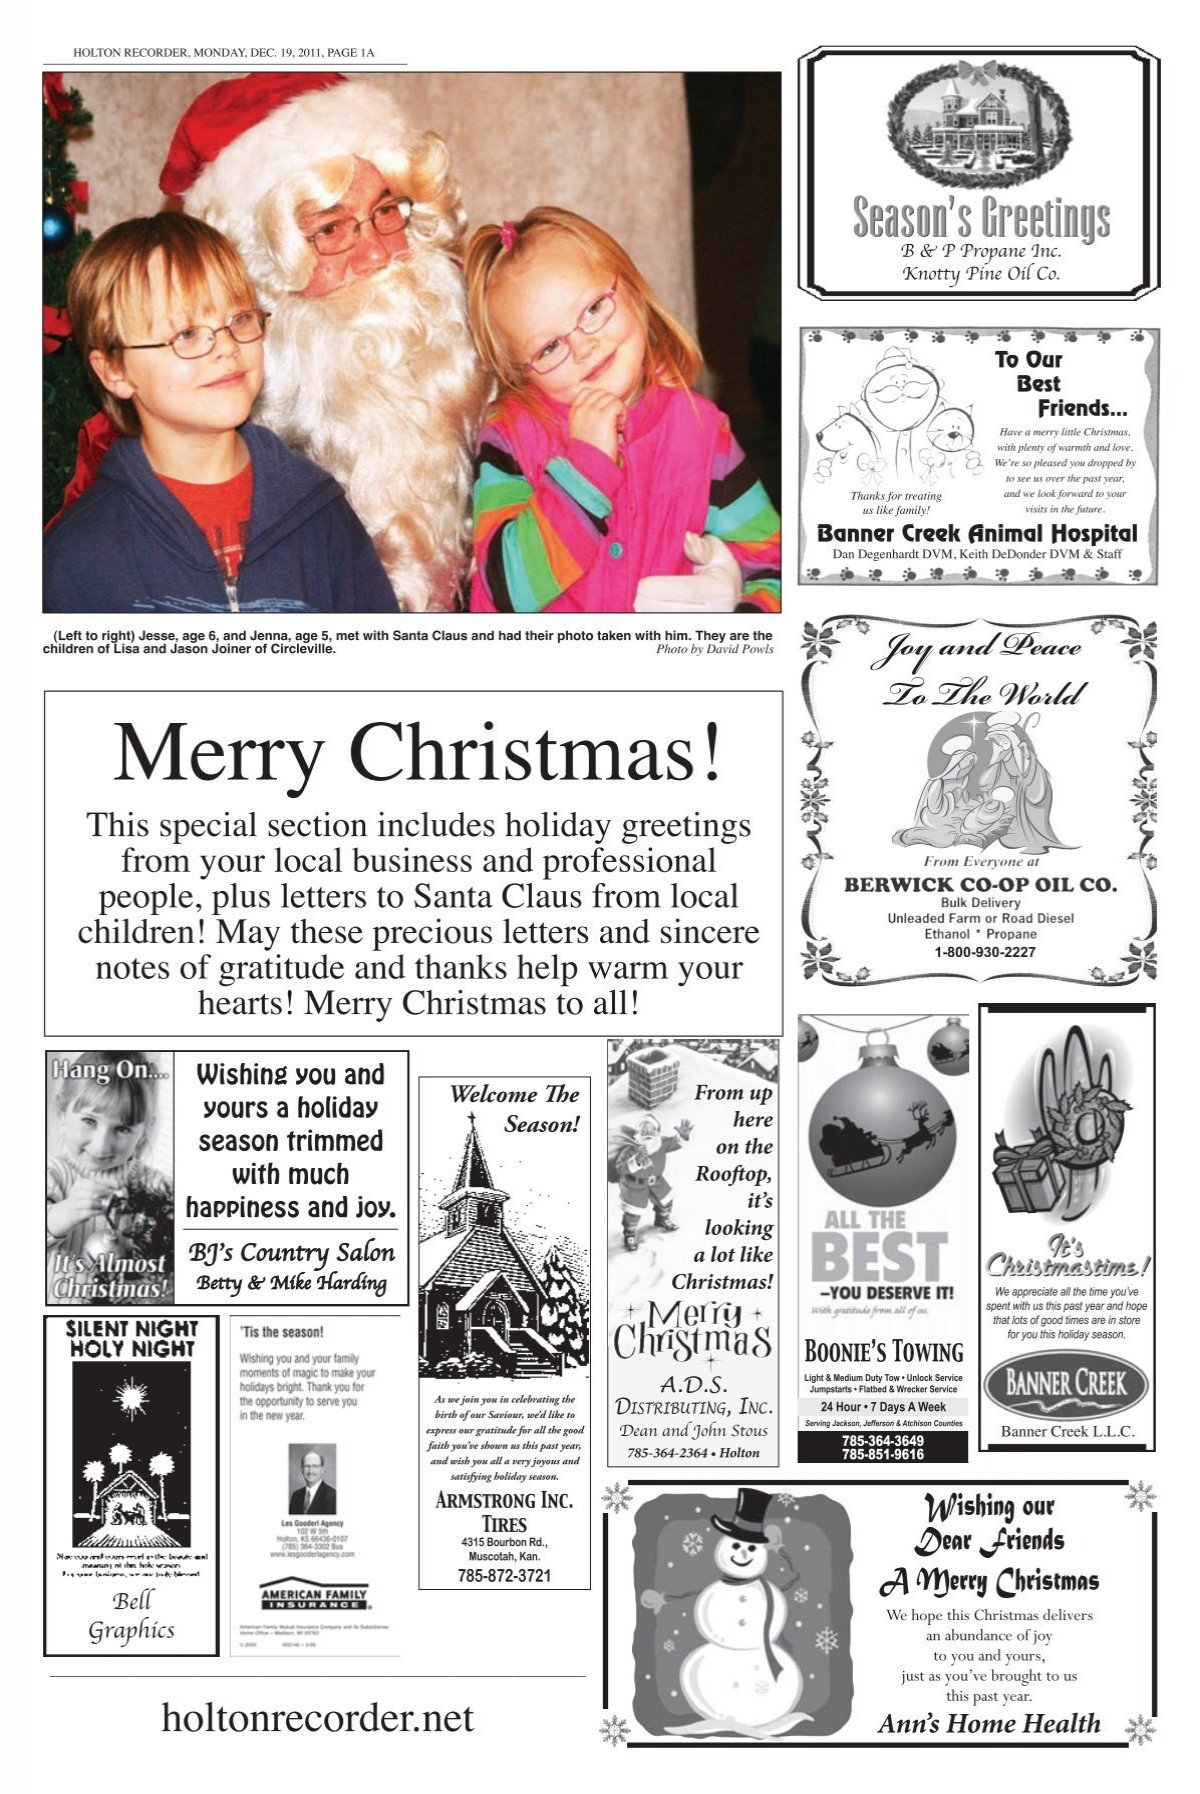 Joy and Peace To The World - The Holton Recorder